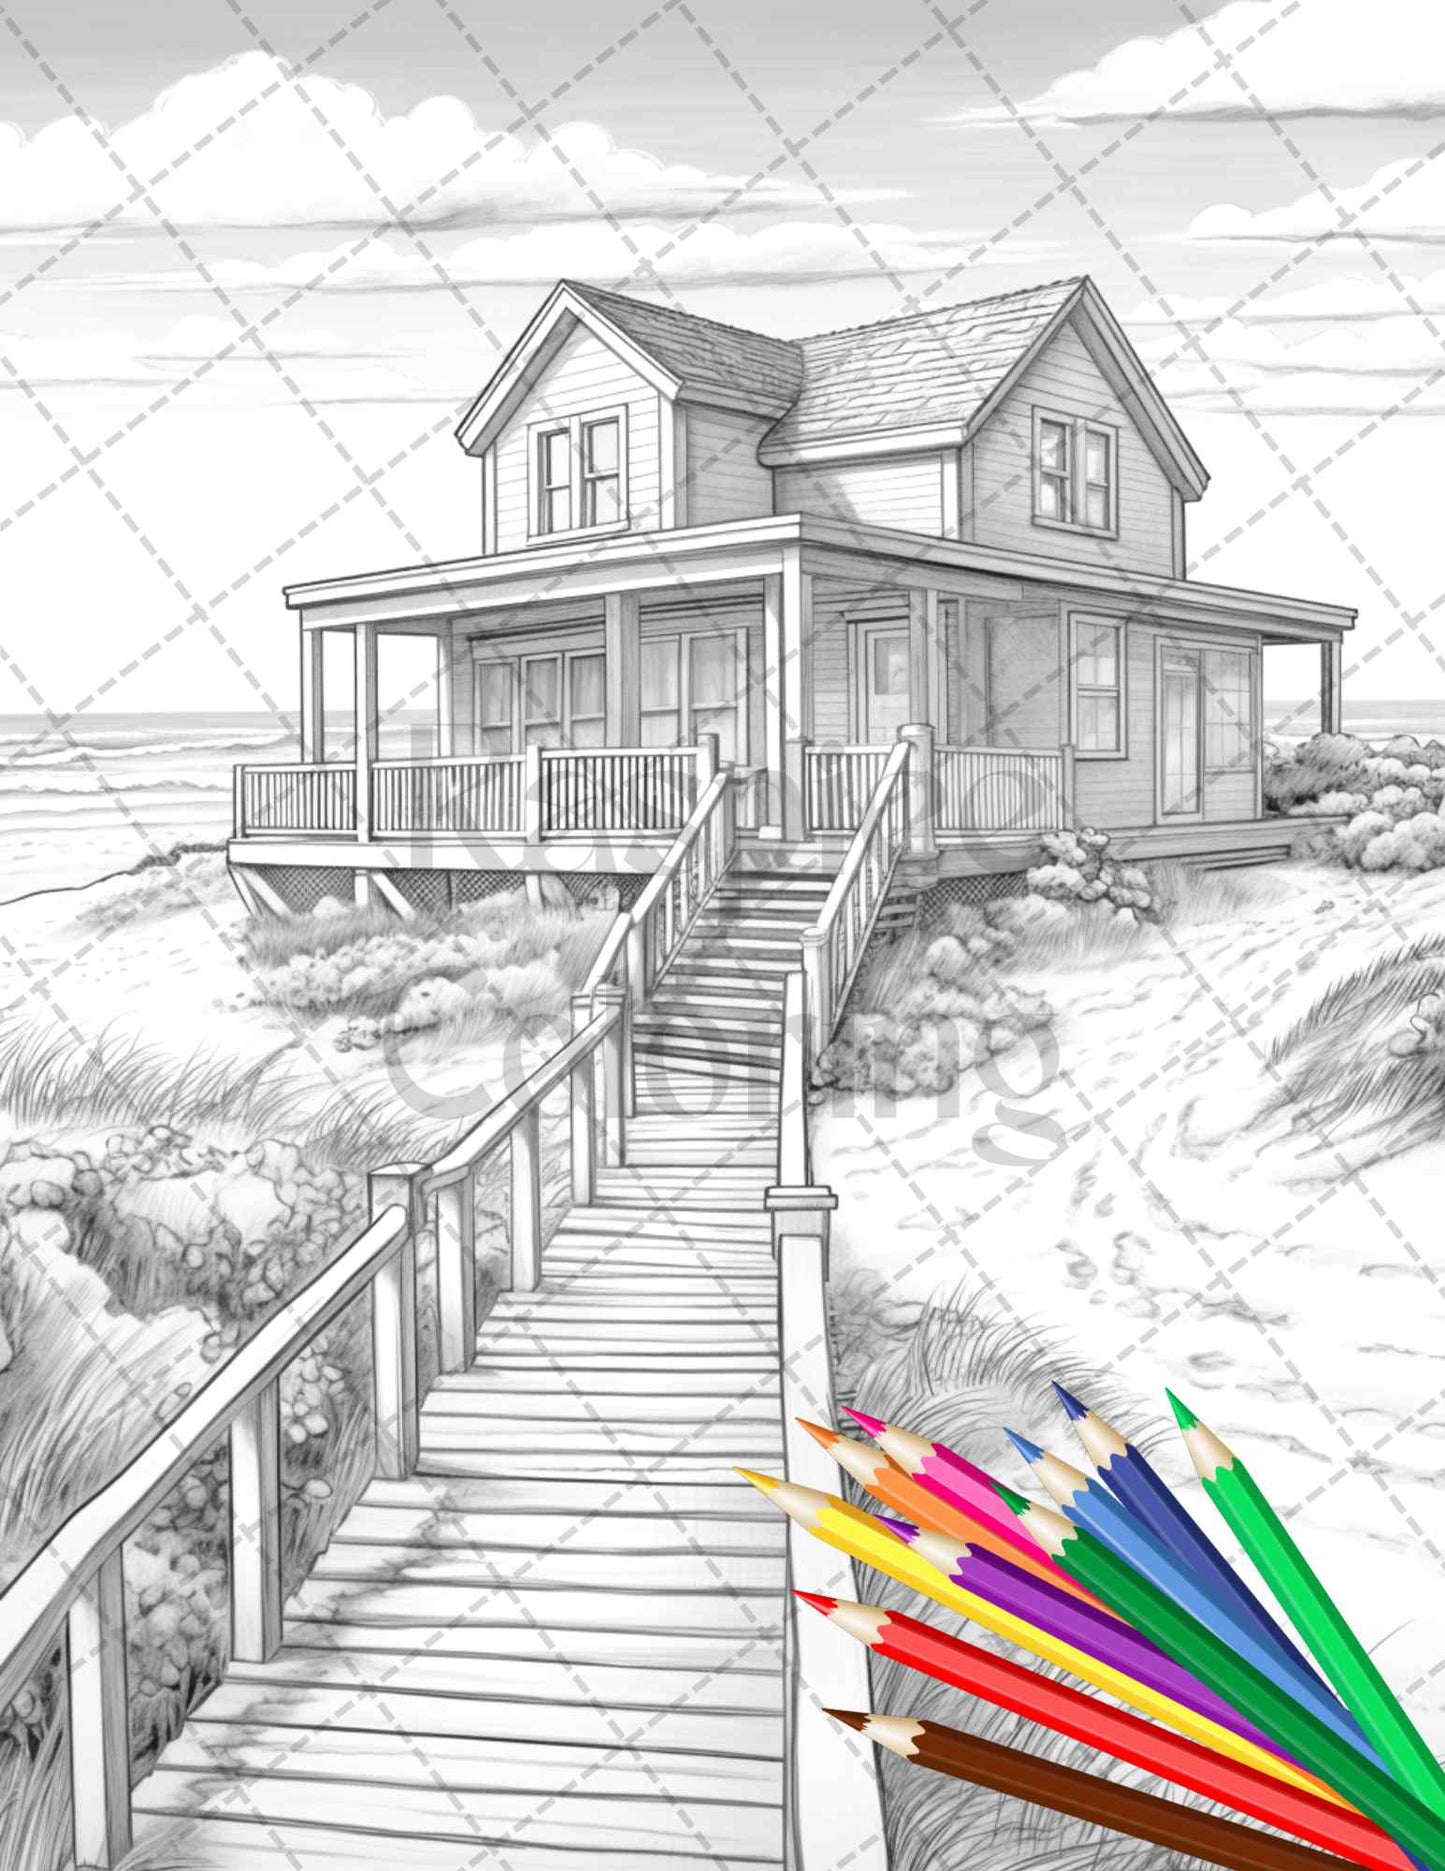 42 Wooden Beach Houses Grayscale Coloring Pages Printable for Adults, PDF File Instant Download - raspiee